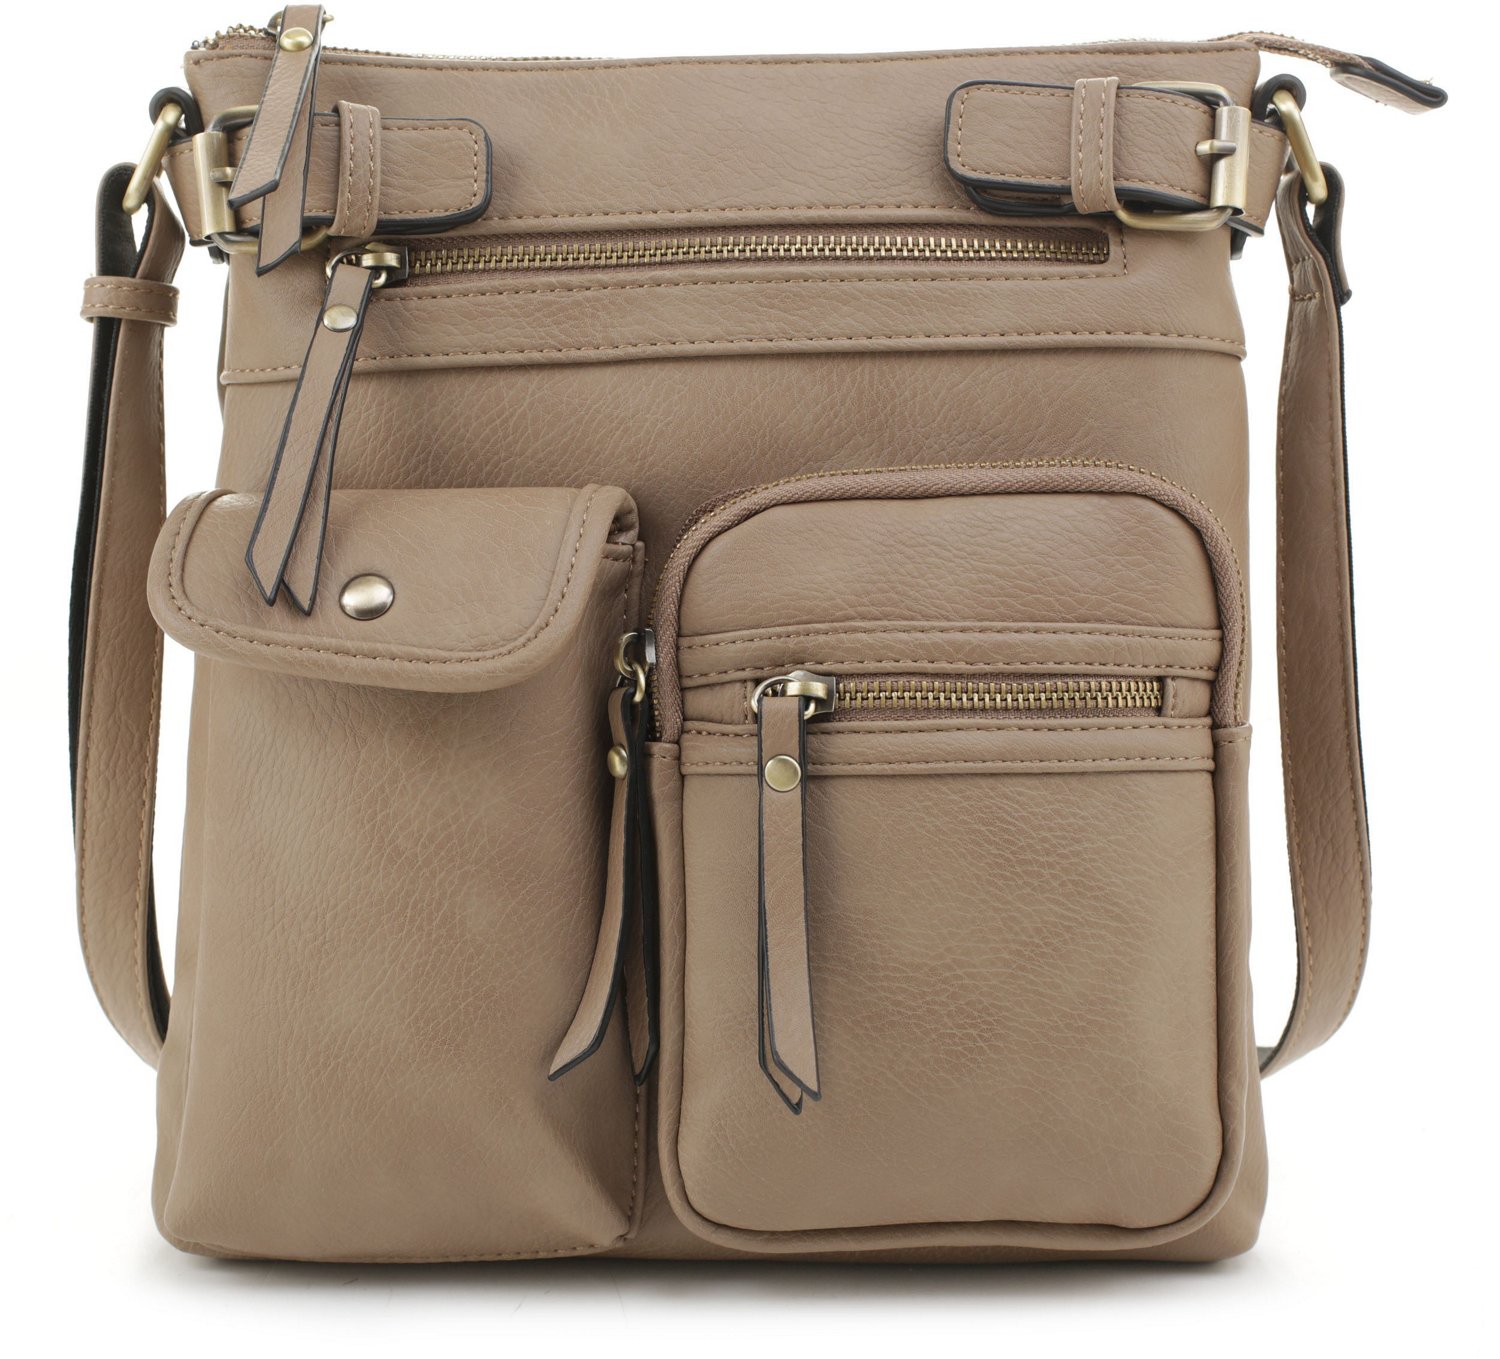 Jessie & James Shelby Concealed Carry Lock and Key Crossbody Bag | Academy